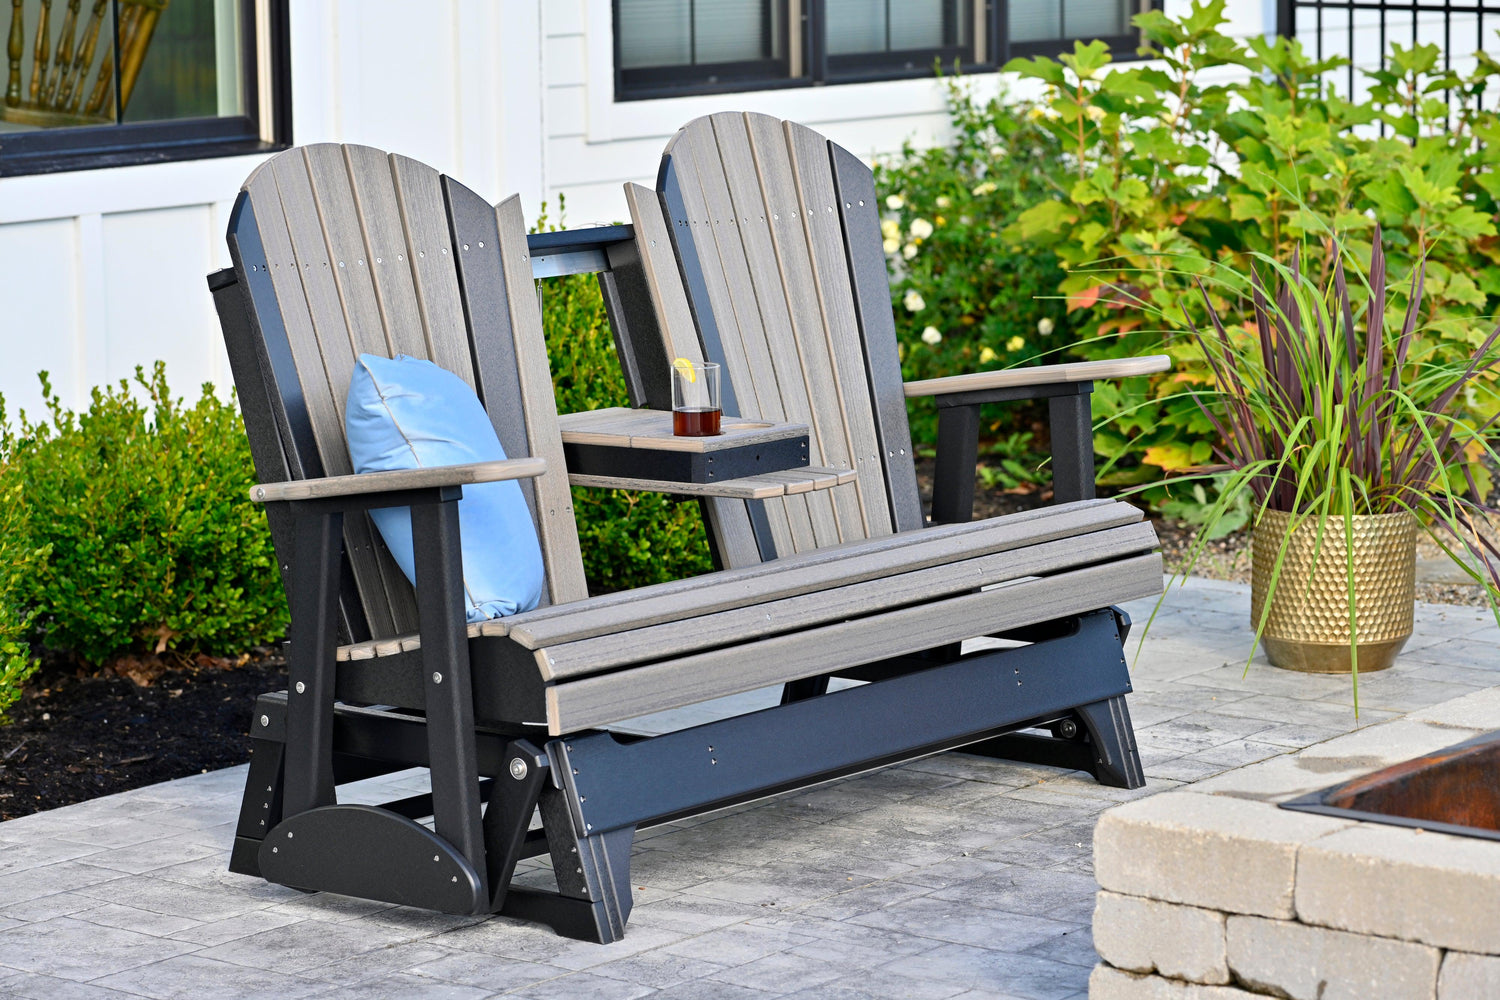 BLACK FRIDAY PATIO FURNITURE SALE 10% OFF PLUS FREE SHIPPING